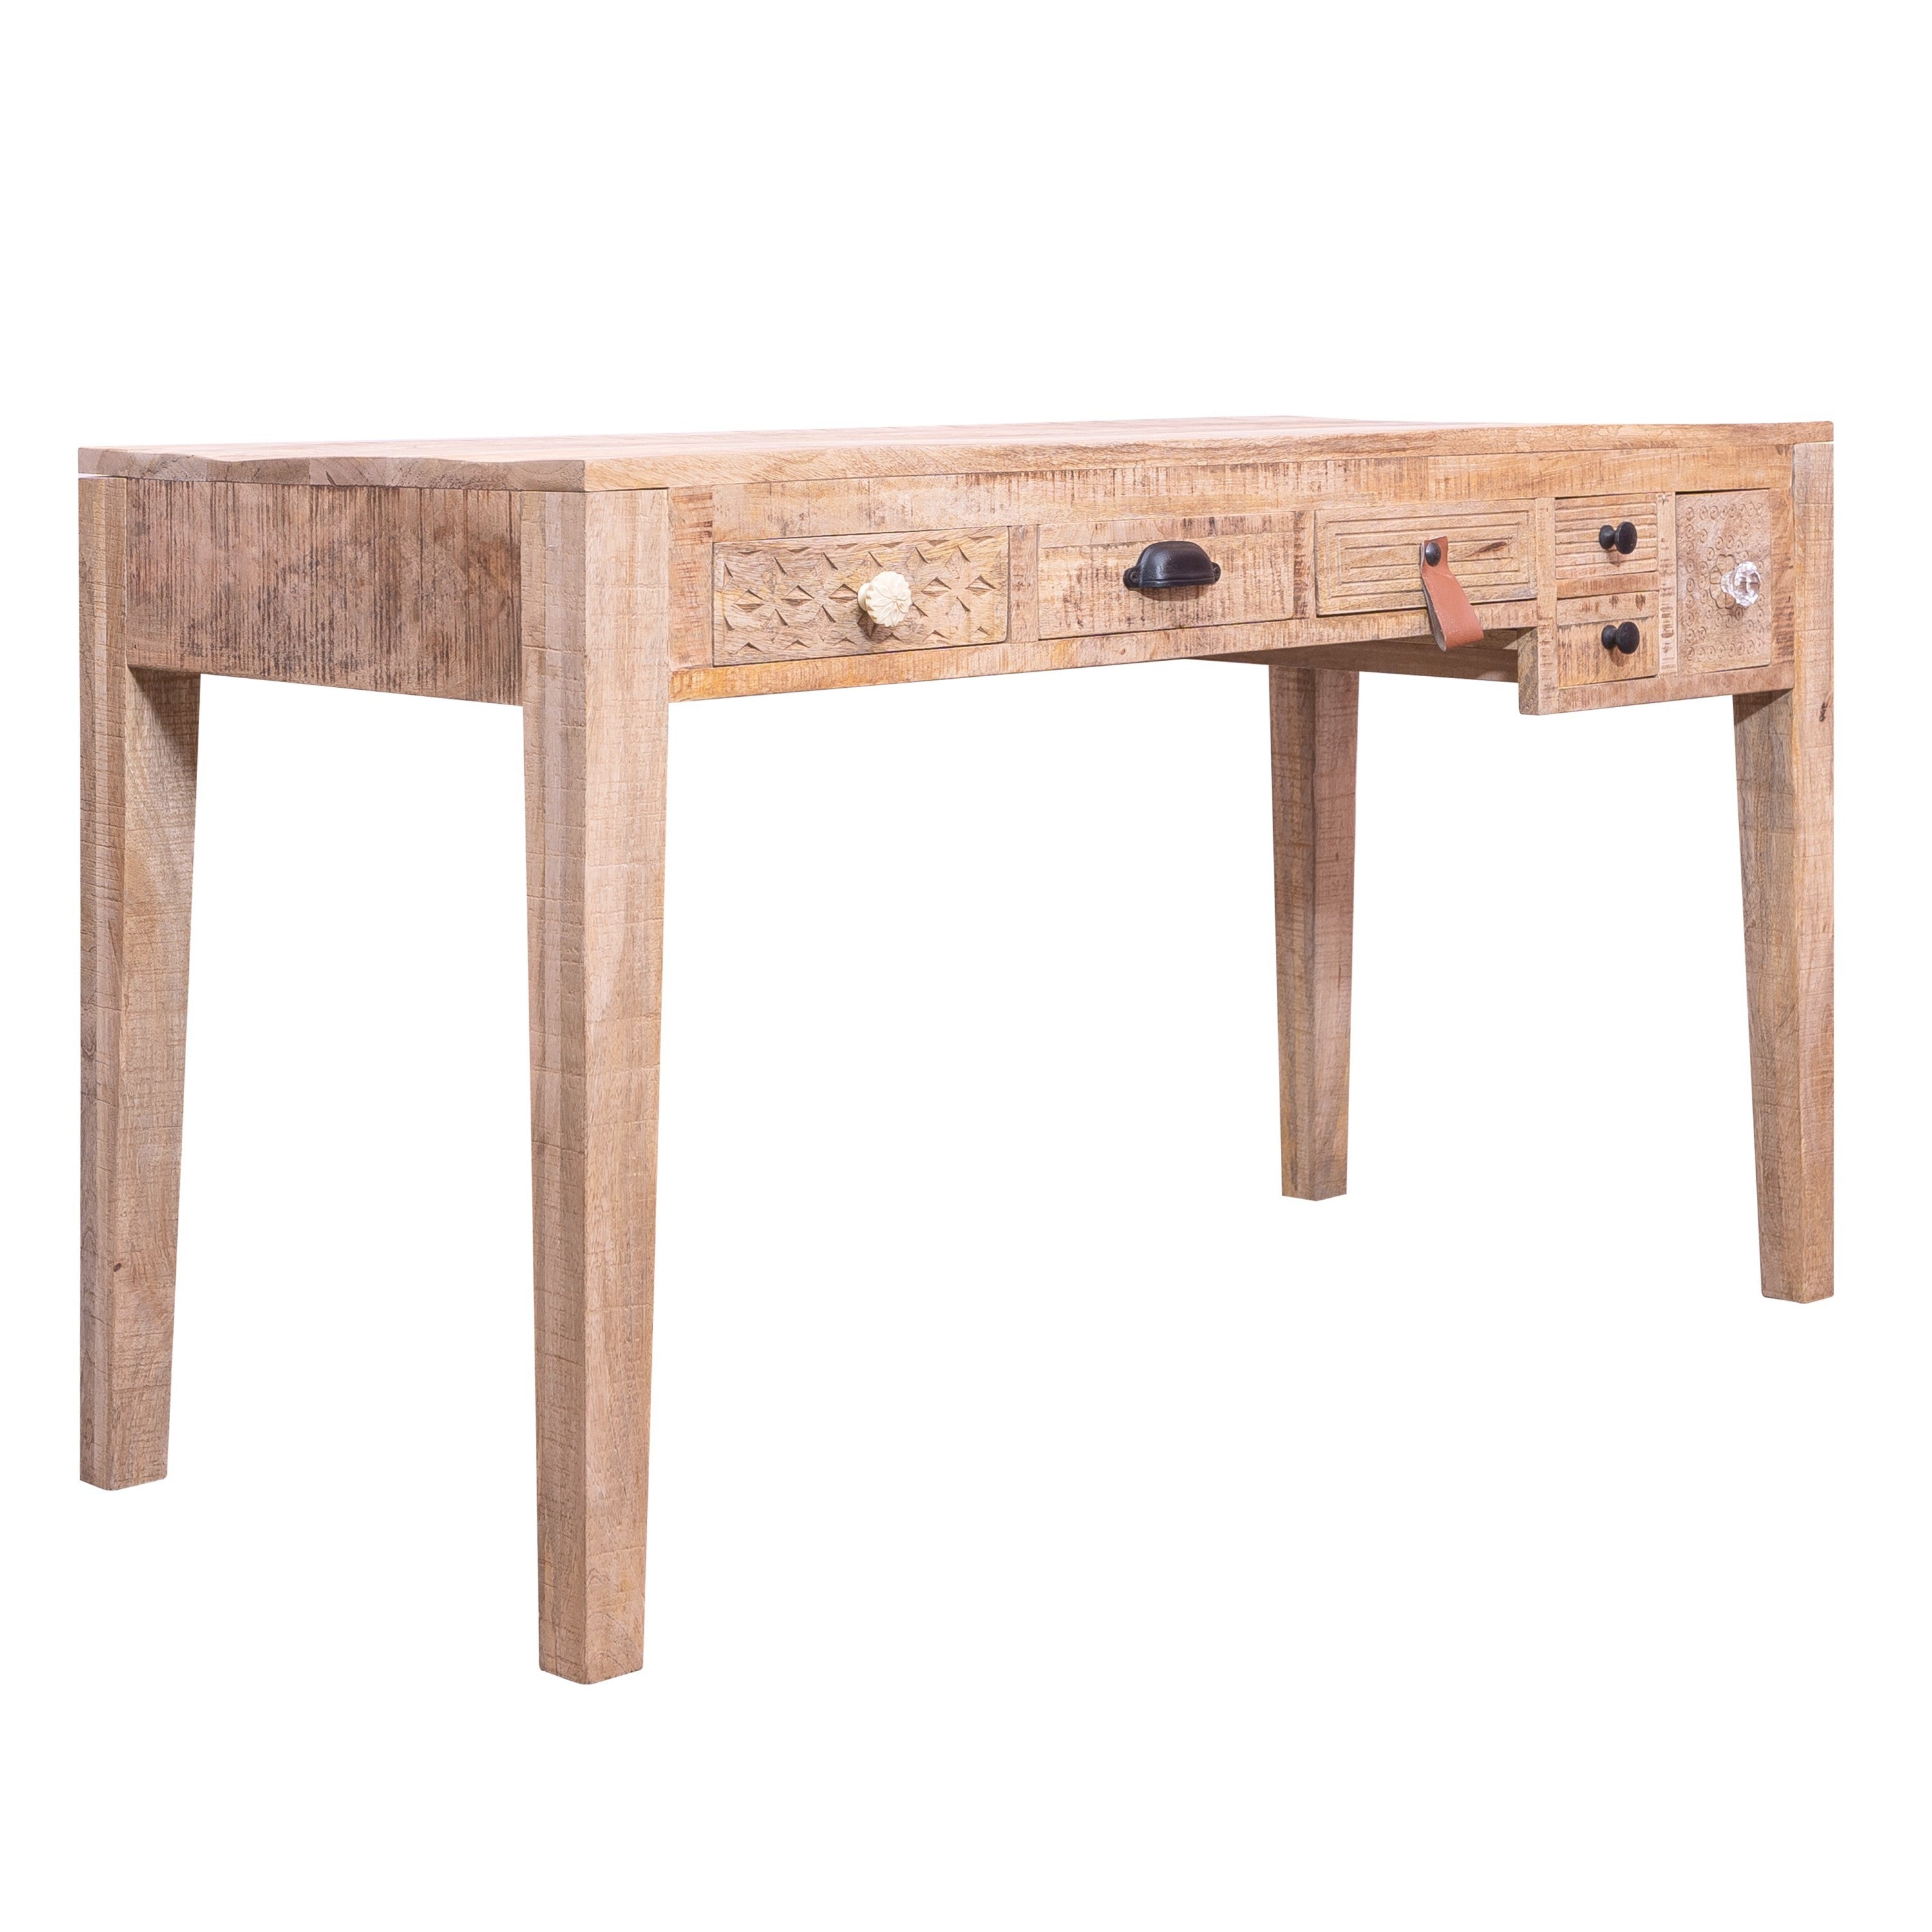 Grained Rustic Boho Mango Wood Desk 6 Drawer with Straight Legs - Weathered Brown